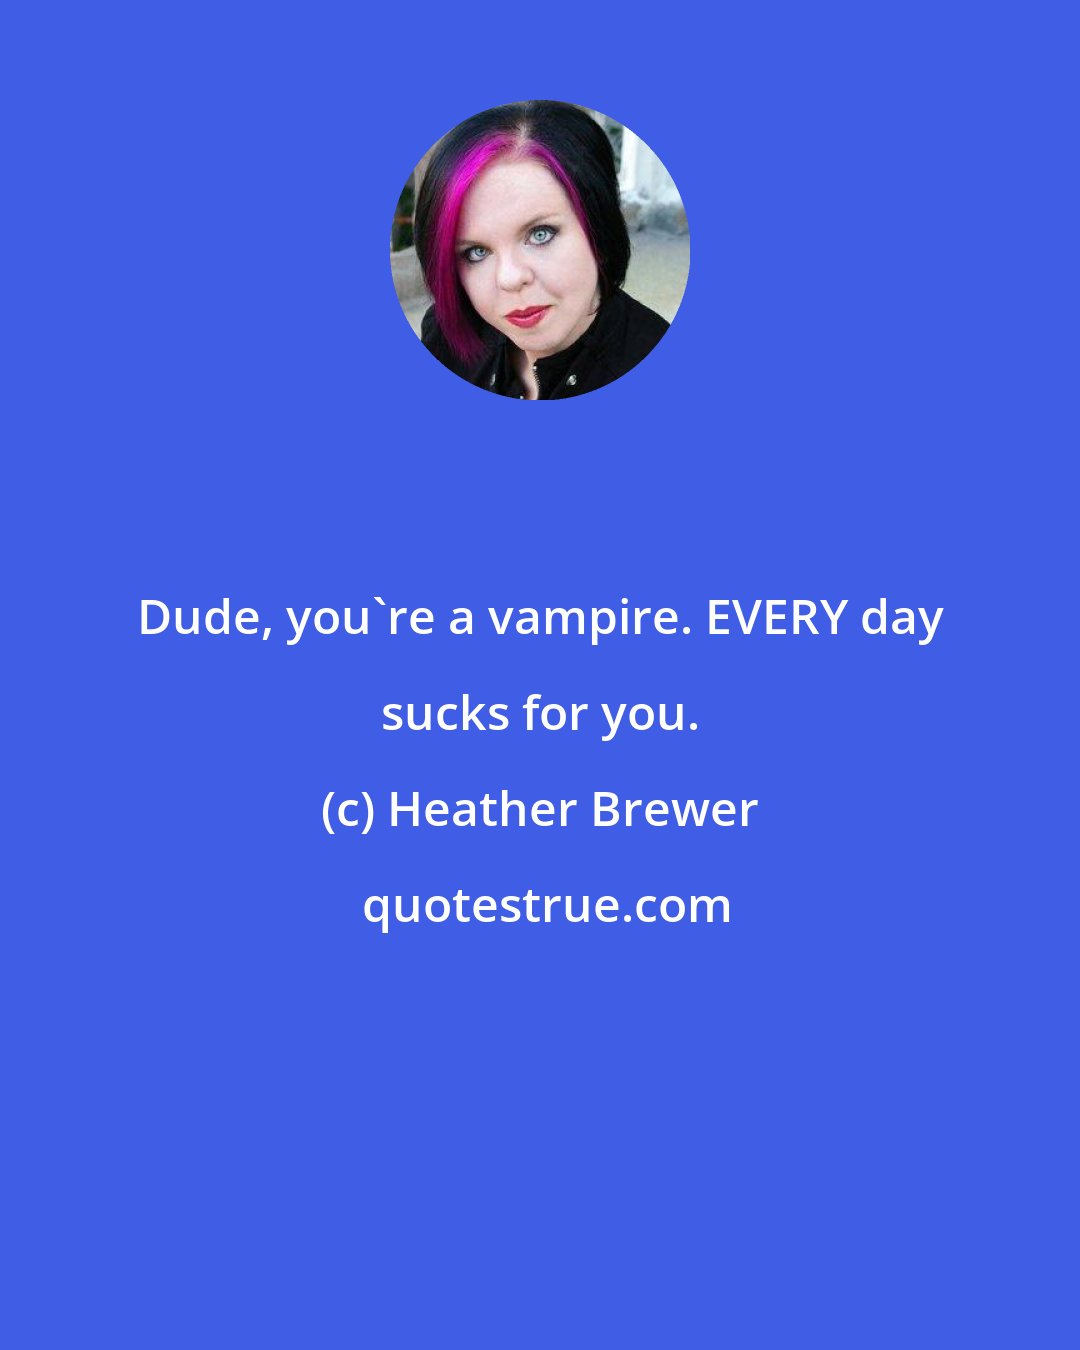 Heather Brewer: Dude, you're a vampire. EVERY day sucks for you.